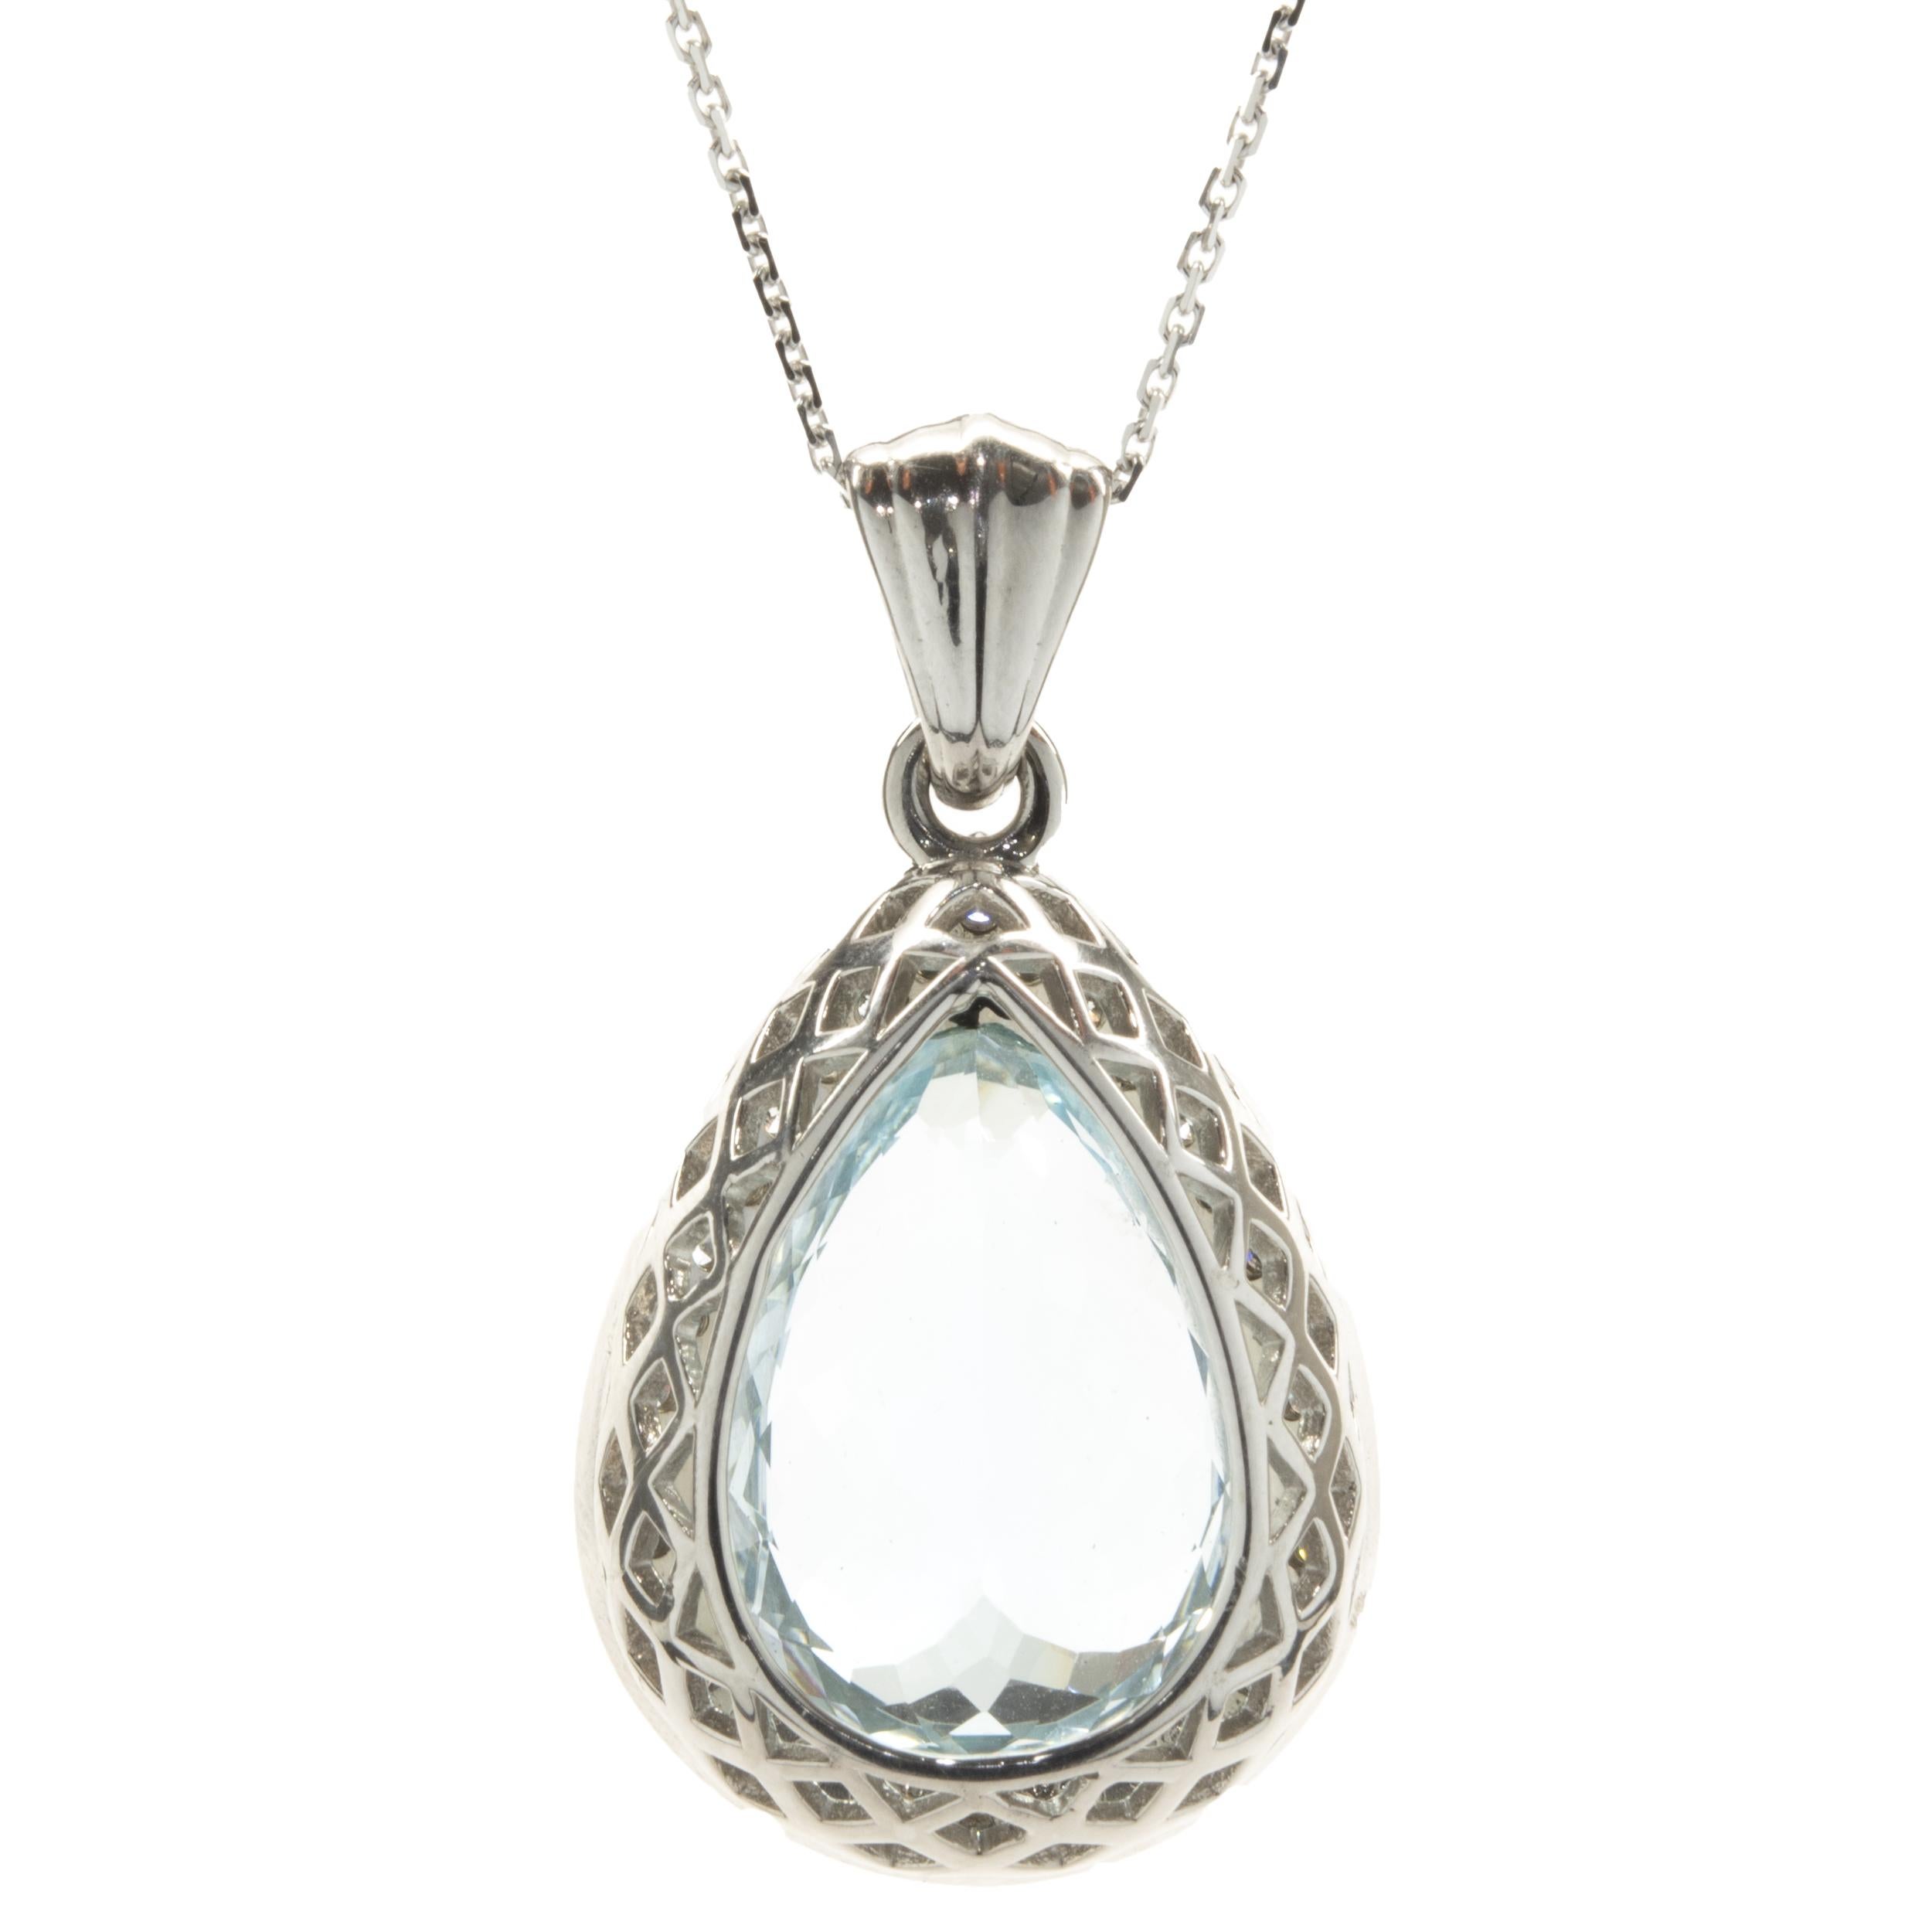 Designer: custom
Material: 14K white gold
Diamond: 34 round brilliant cut = .81cttw
Color: G
Clarity: SI1
Aquamarine: 1 pear cut = 18.37ct
Dimensions: necklace measures 18-inches in length
Weight: 14.70 grams